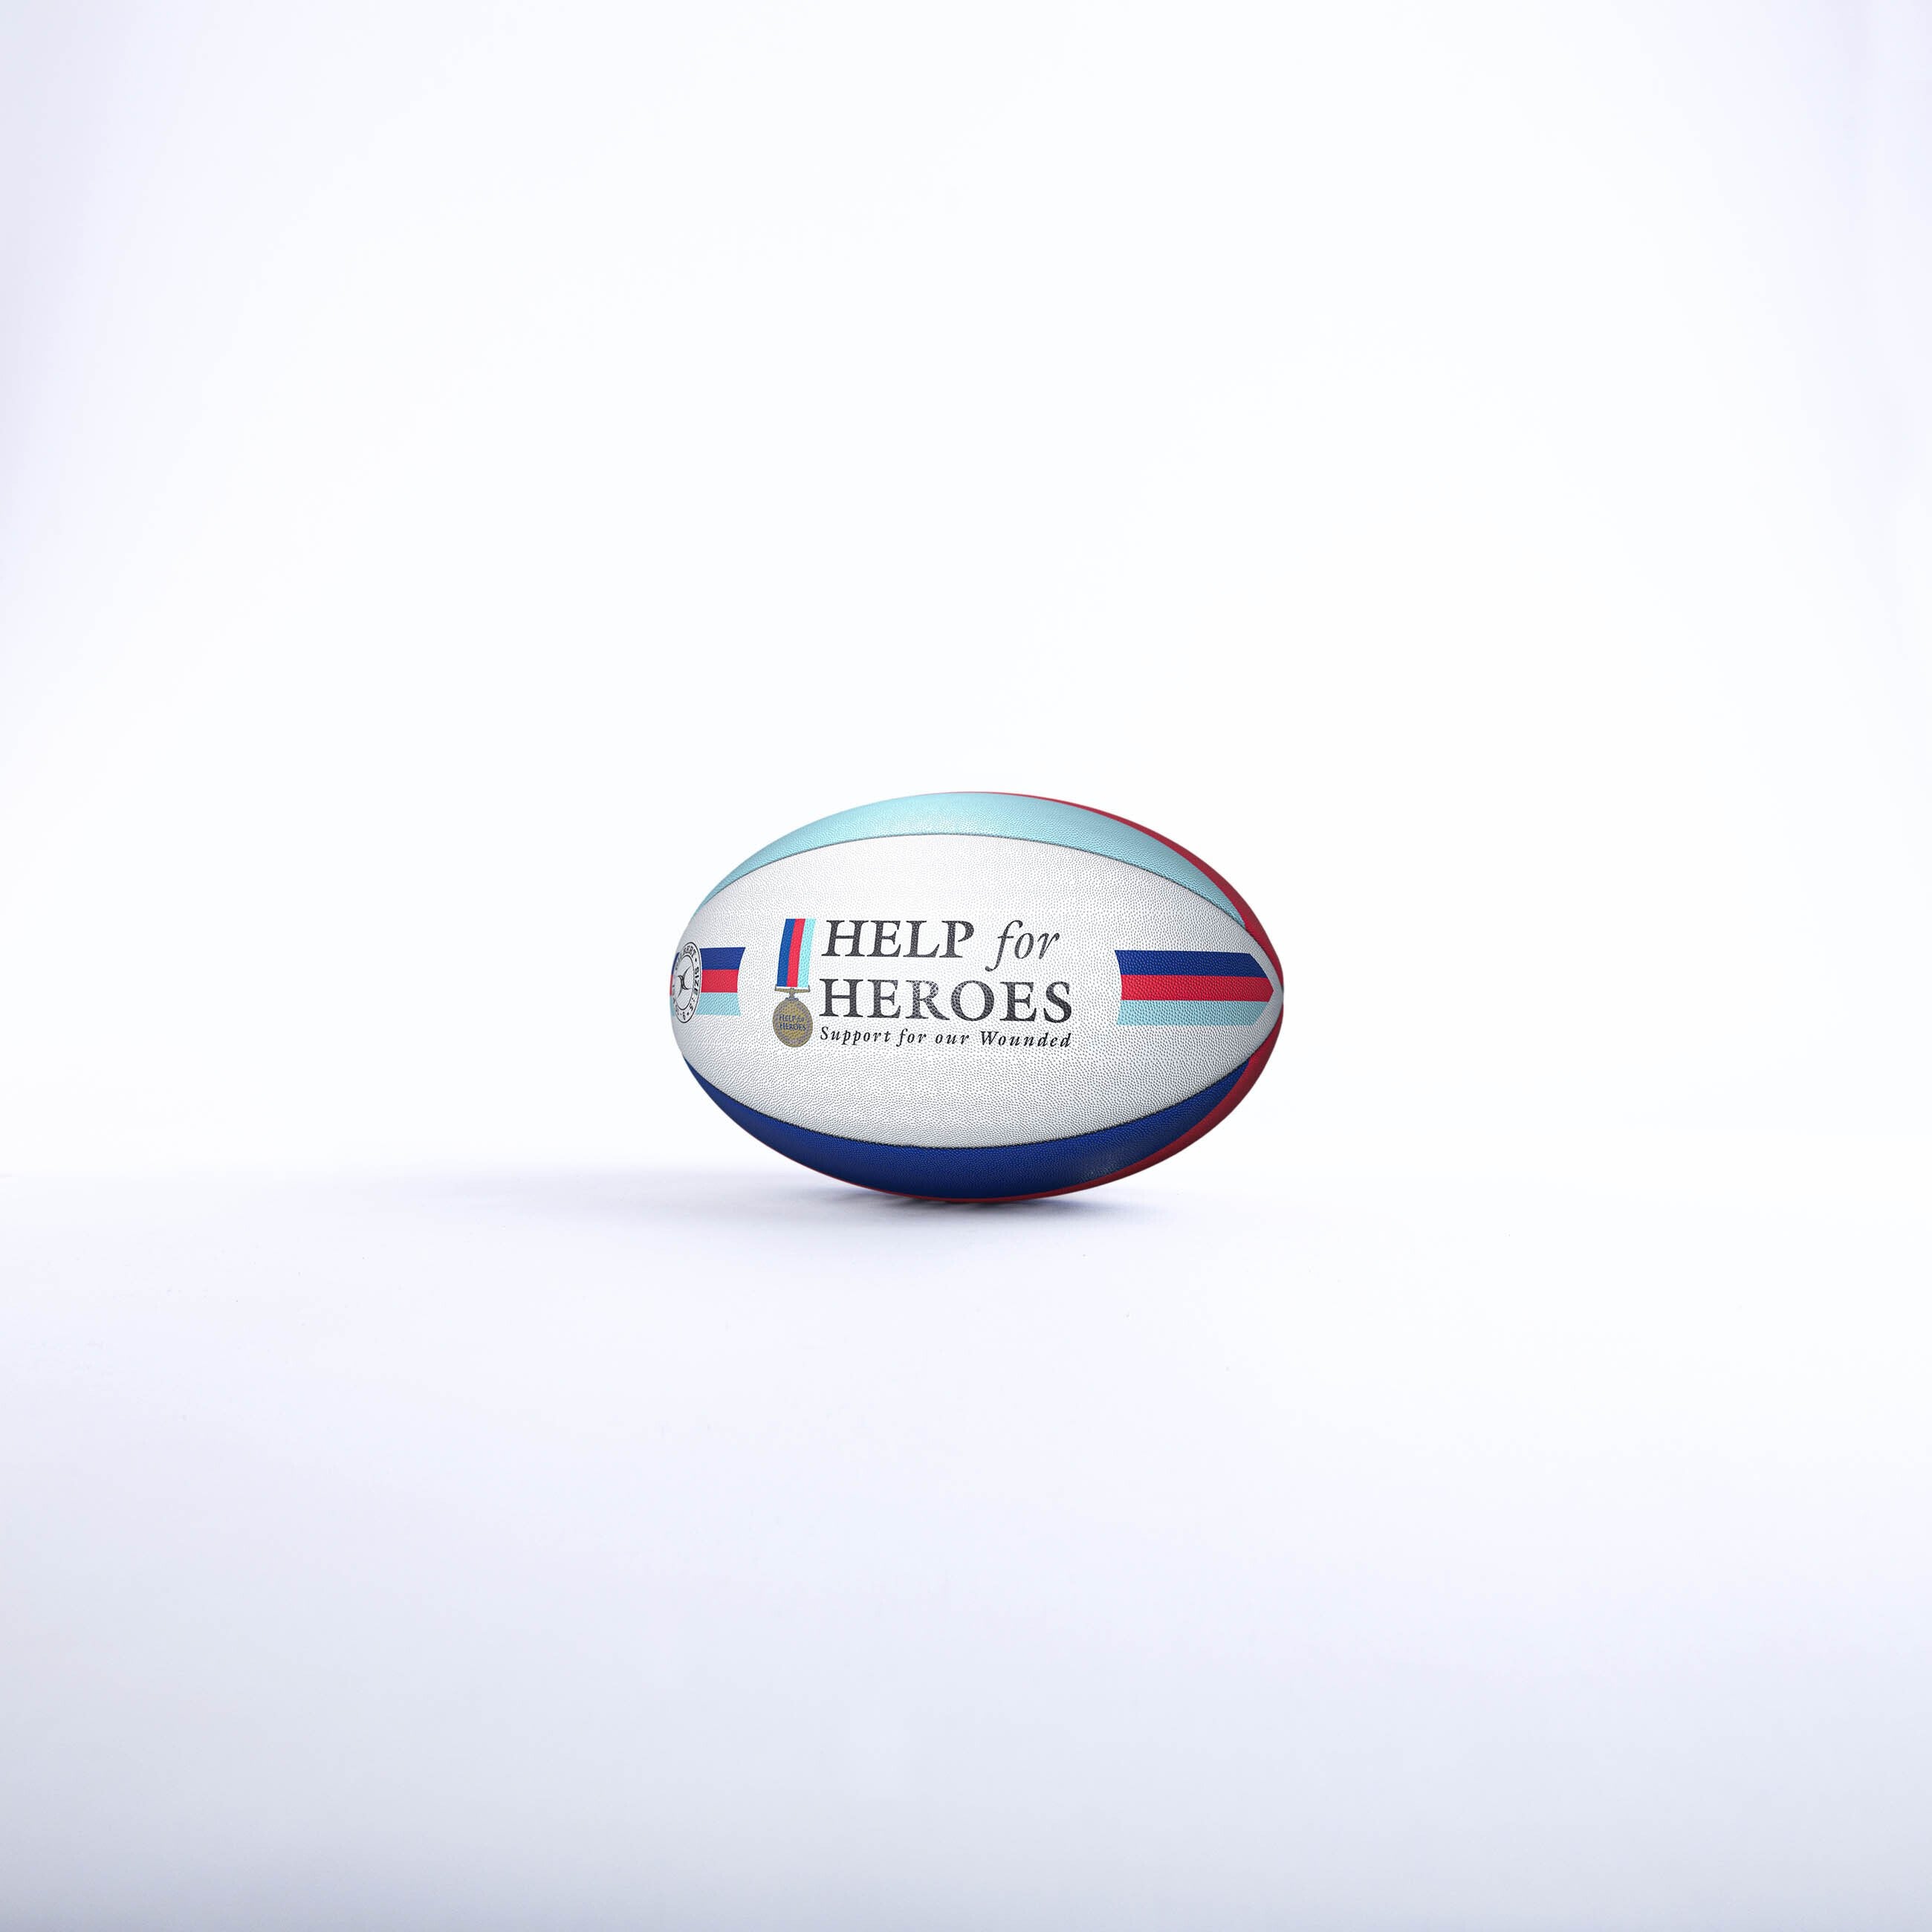 RDED13Replica Balls HELP FOR HEROES SUPPORTER SZ 5 UV 1